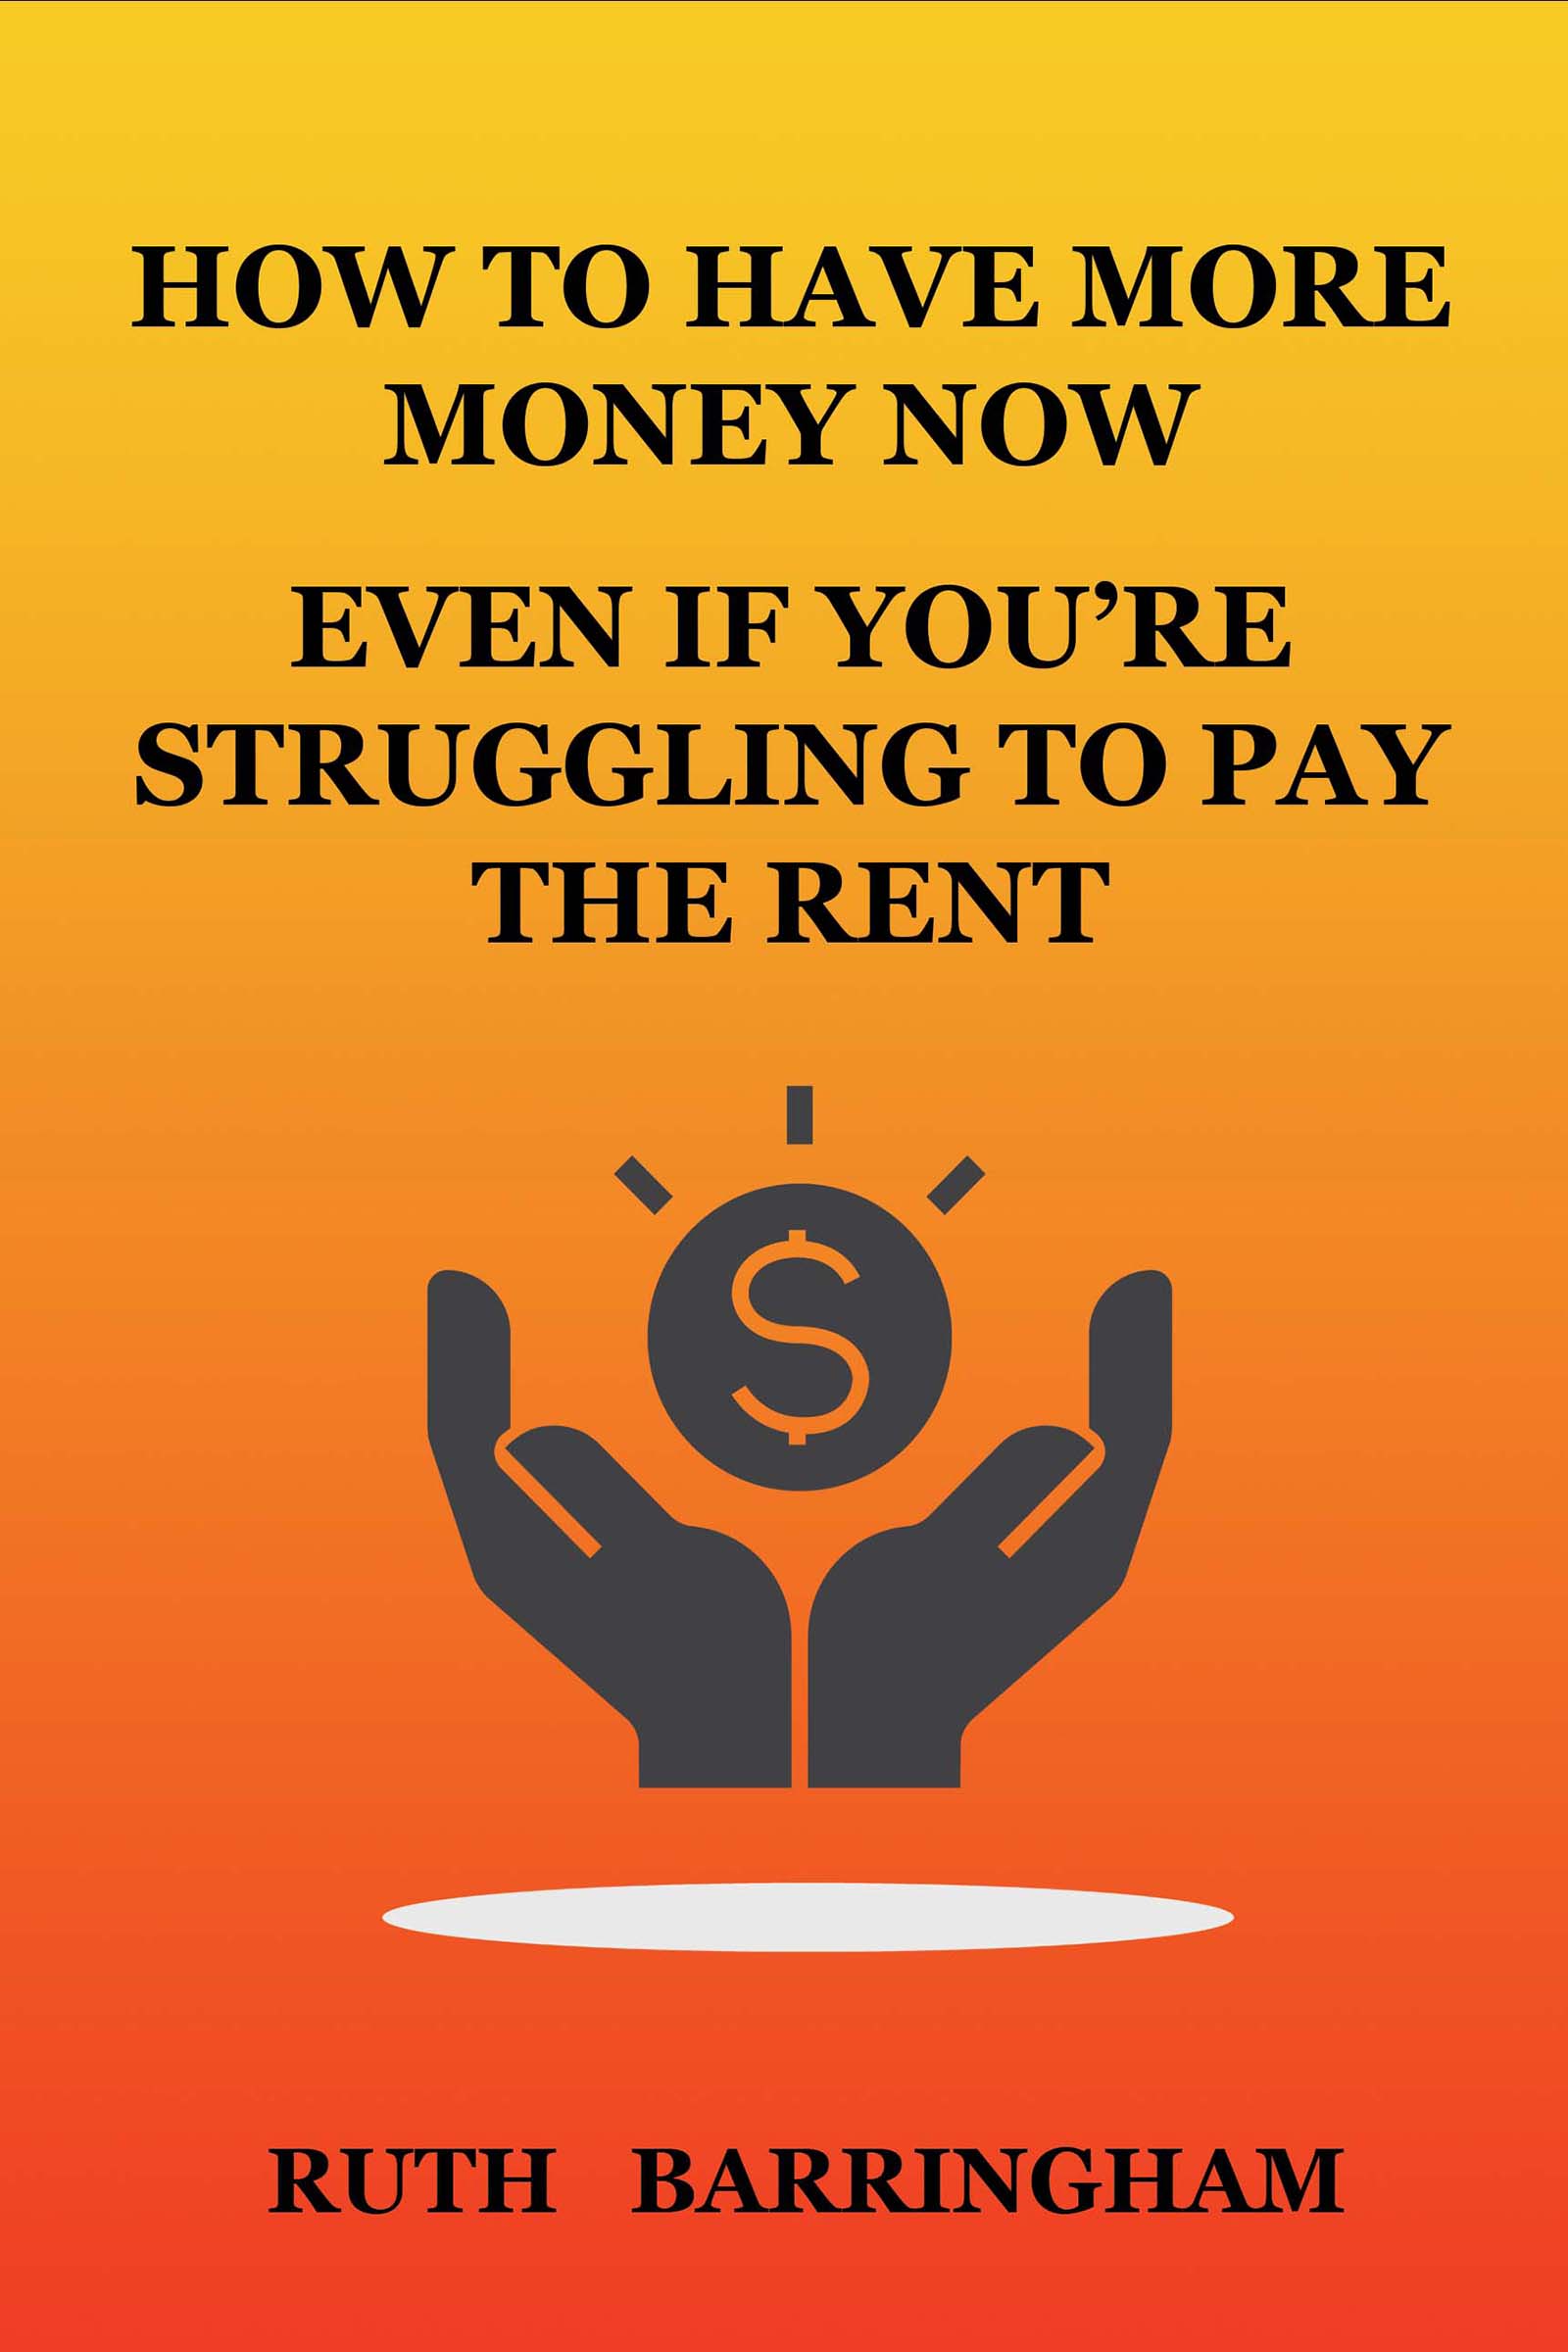 How To Have More Money Now Even If You’re Struggling To Pay The Rent